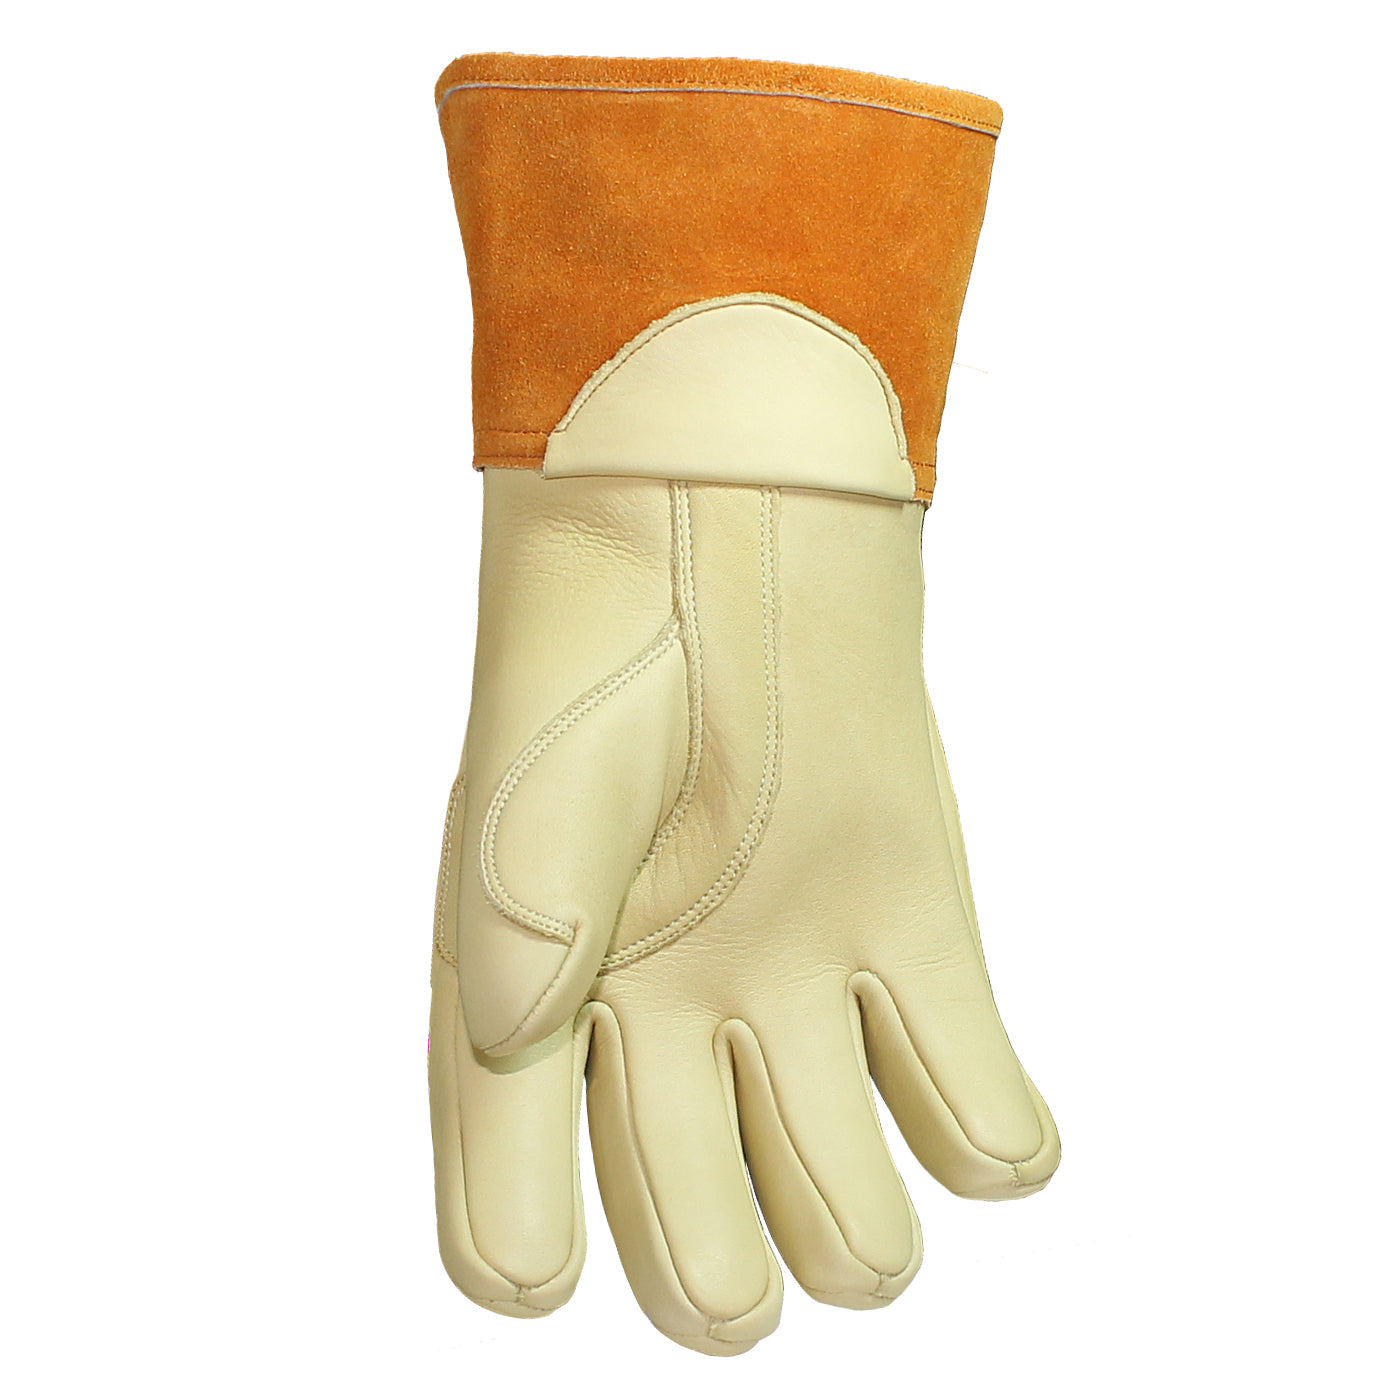 GL2500 - ESD Level 3 Cut Resistant Gloves - Uncoated - ESD